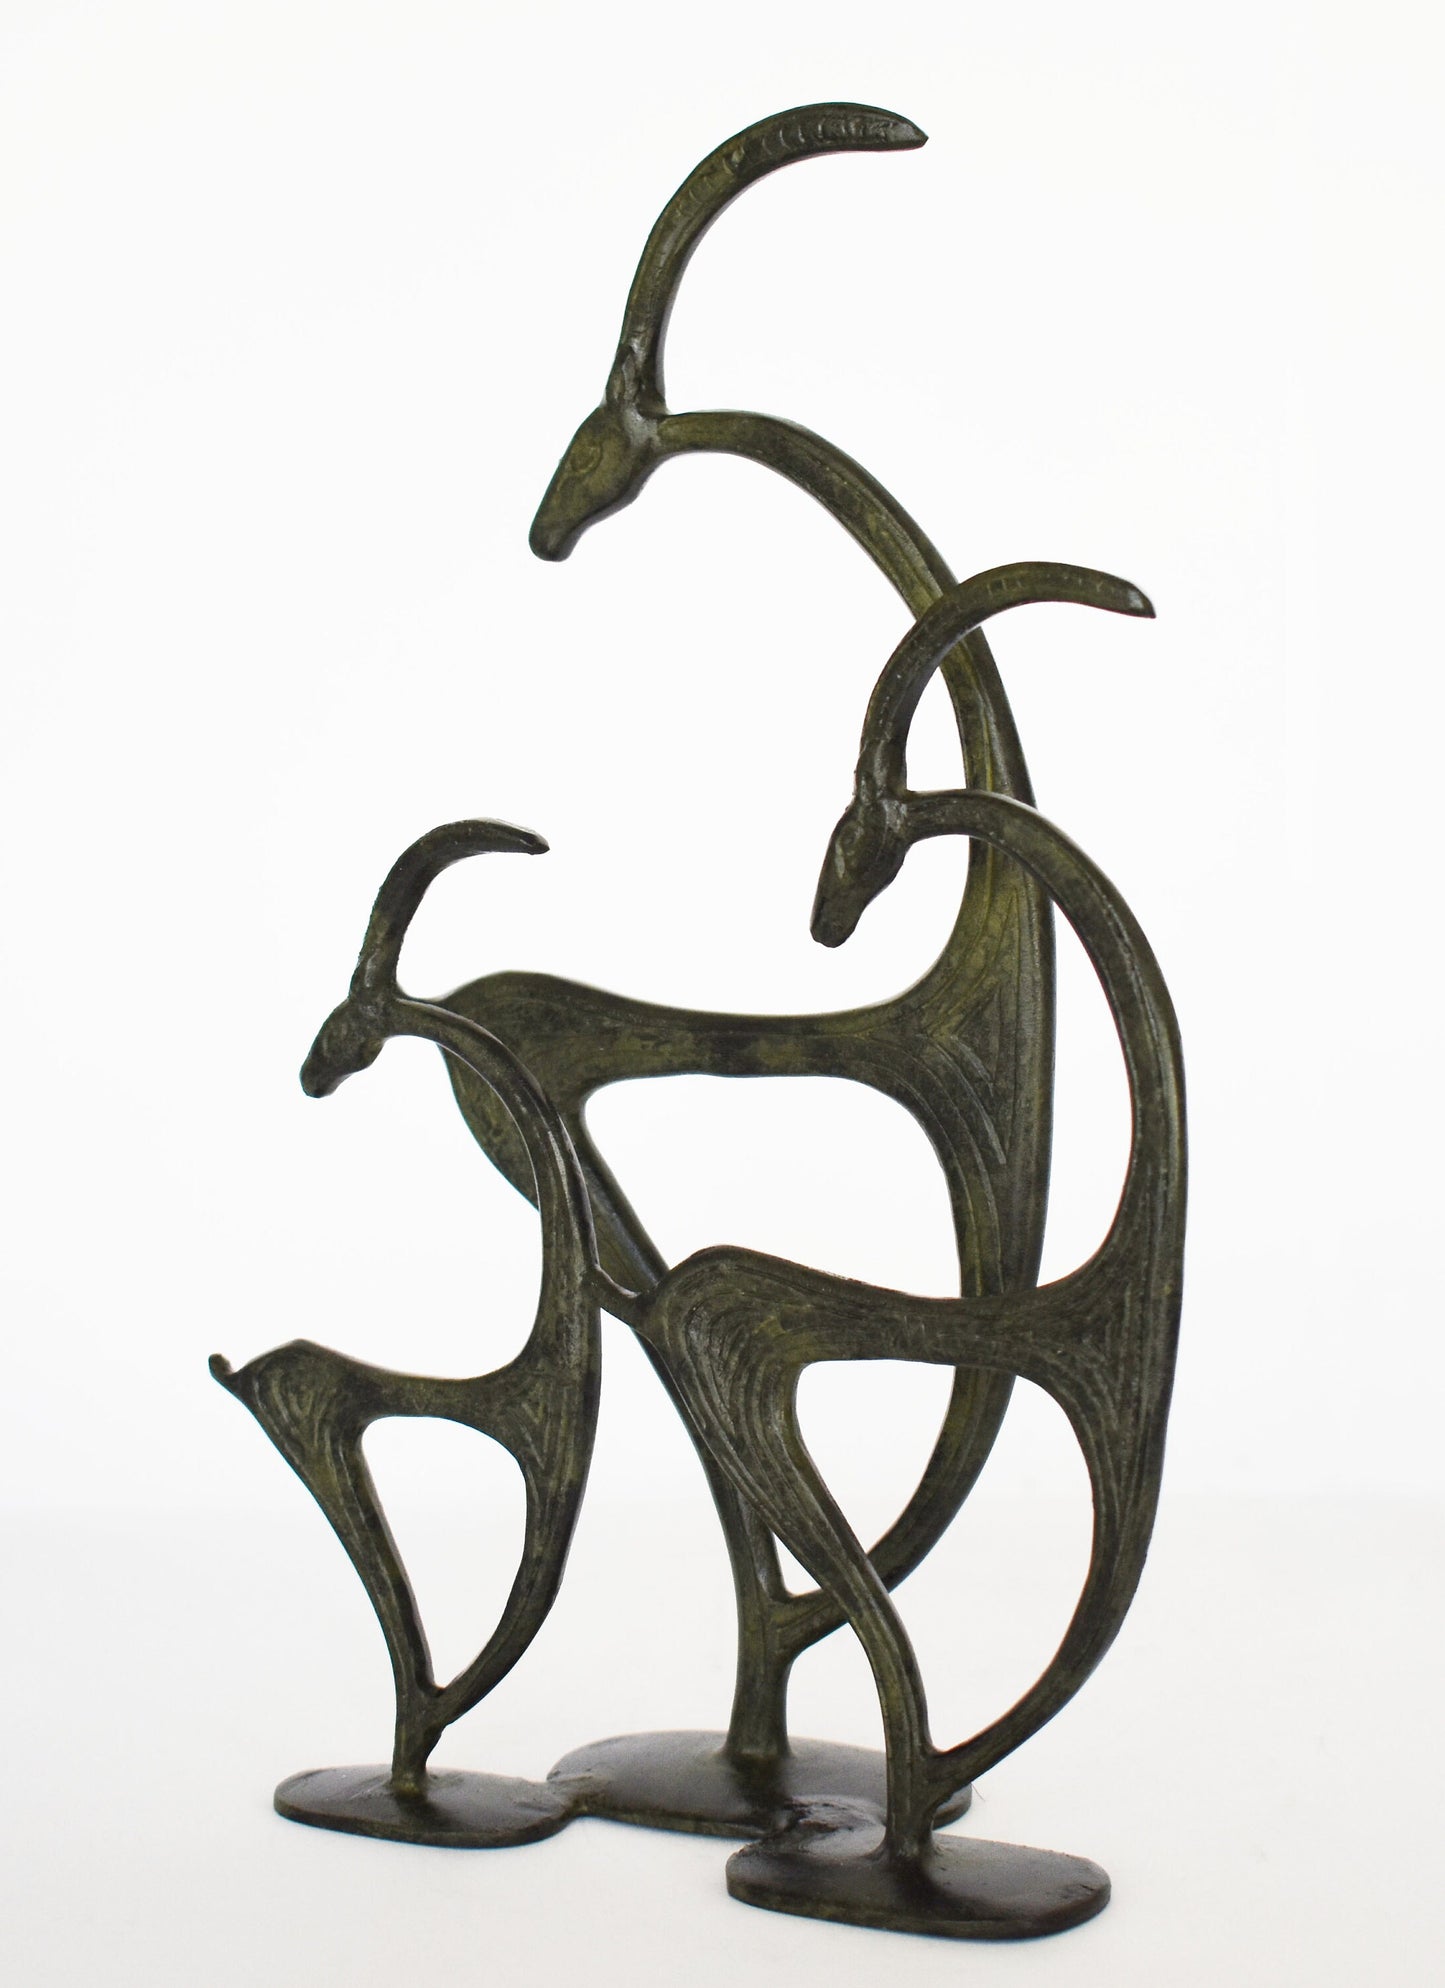 Complex with 3 Graceful Ibex - pure Bronze Sculpture - Symbols of Energy, Long Life, Fertility